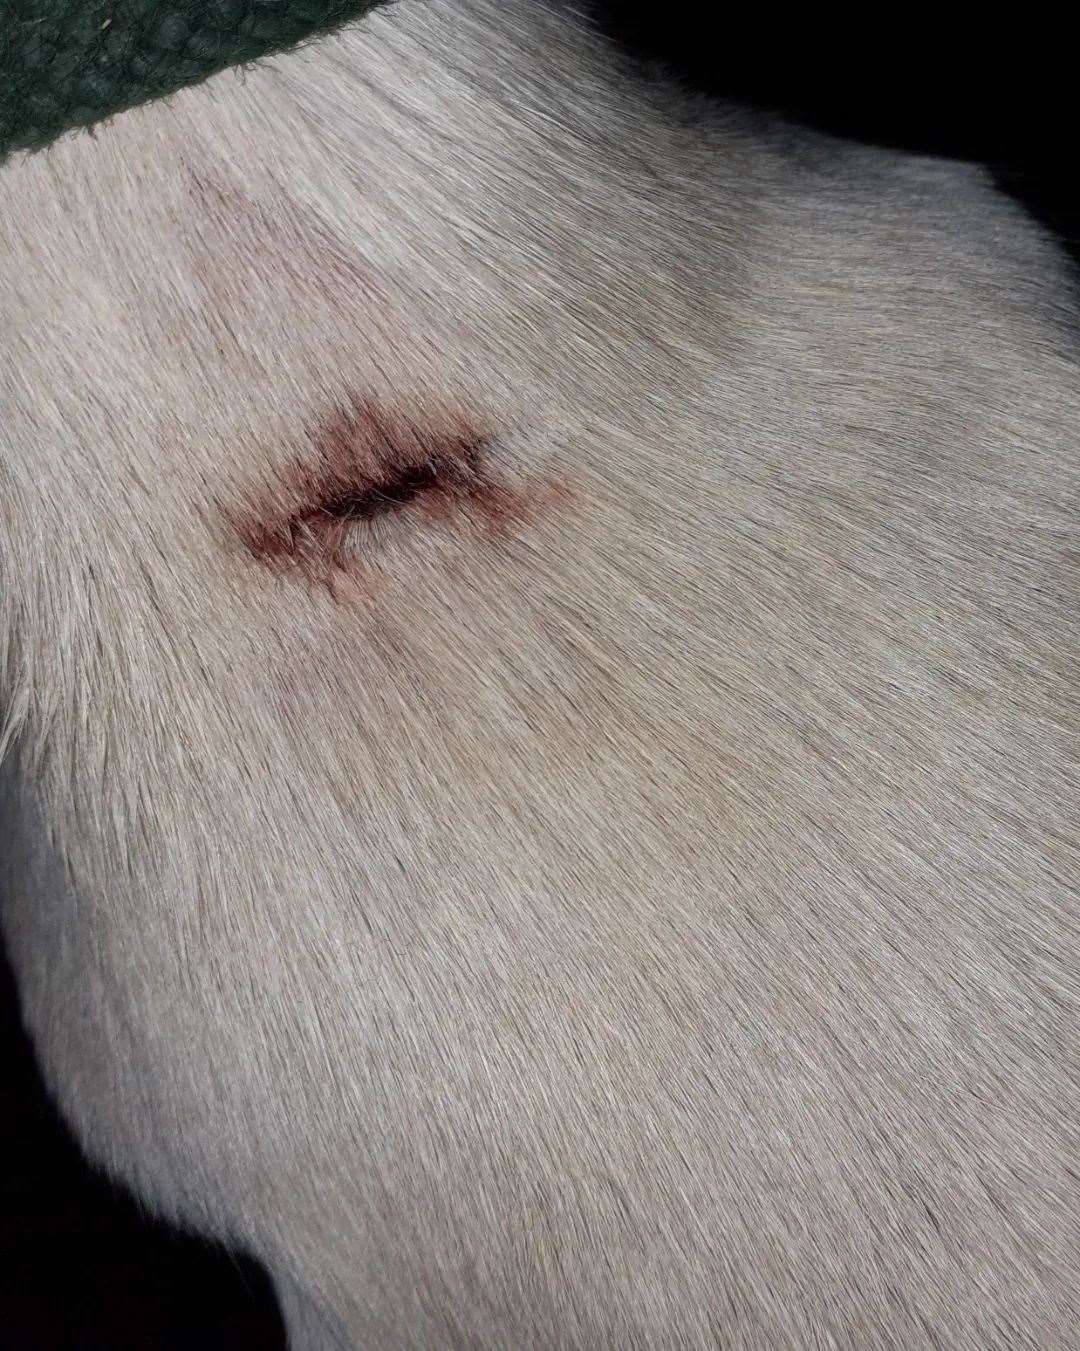 Vets believe the wound on the dogs back is from a microchip being removed (54426148)